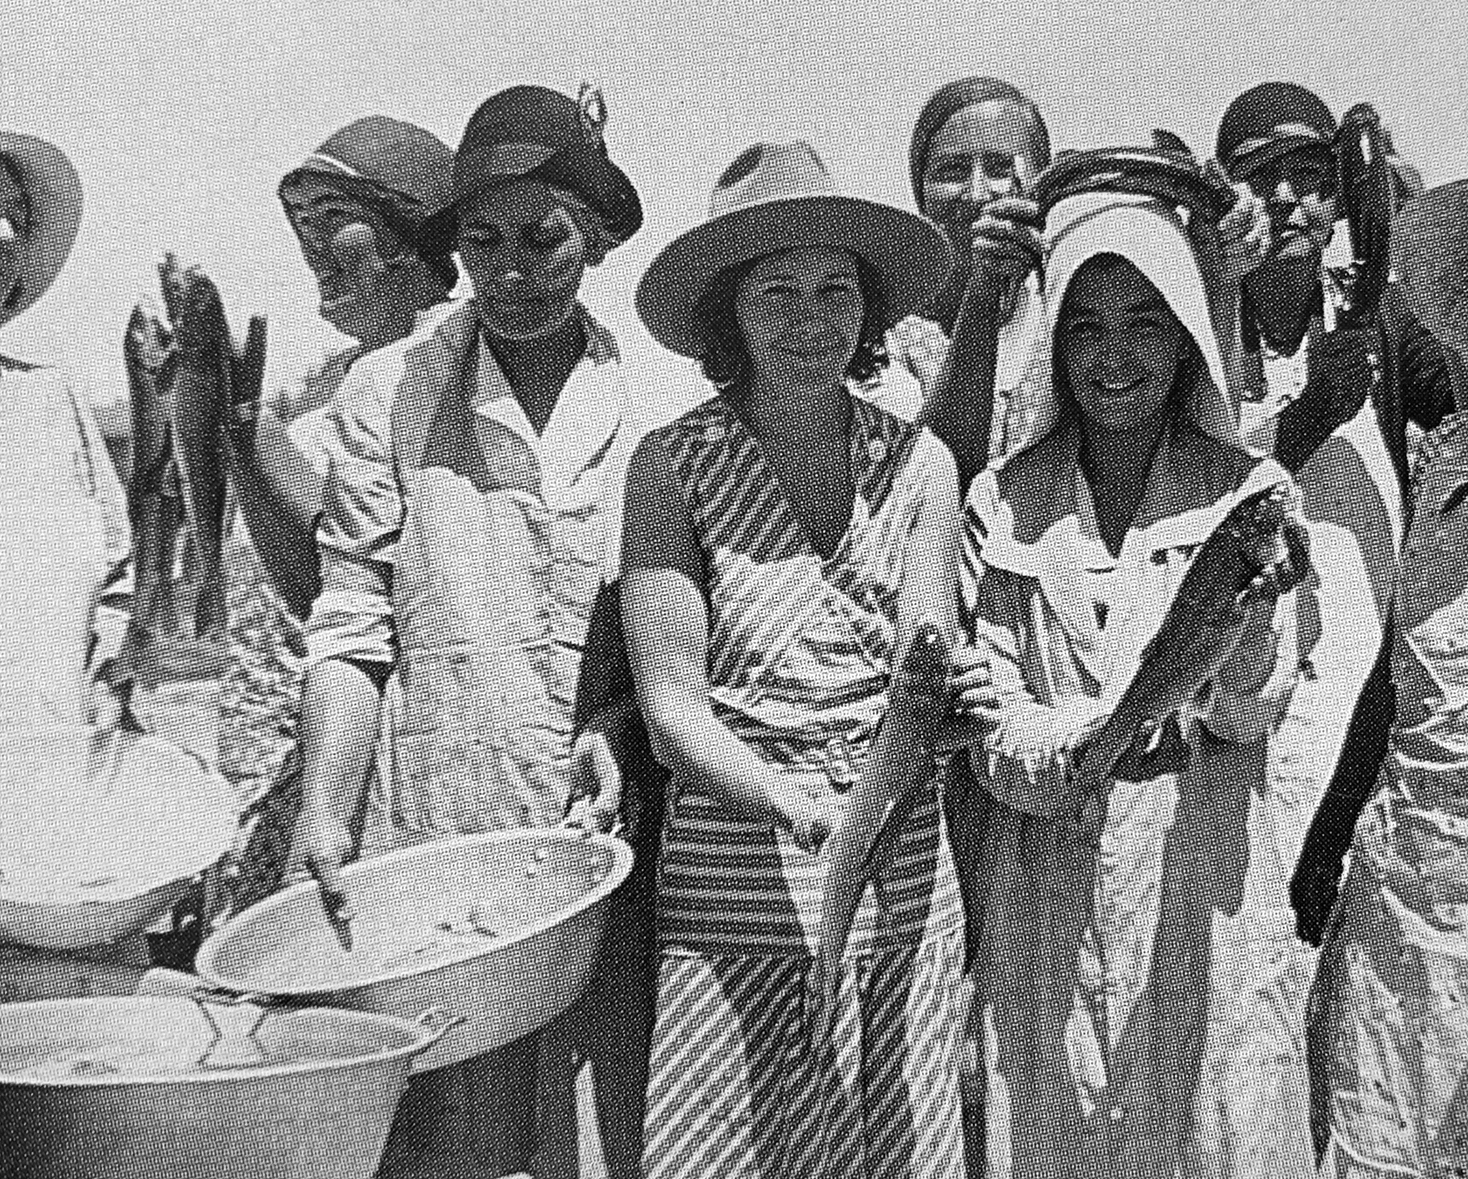 Group of women holding fish and pots